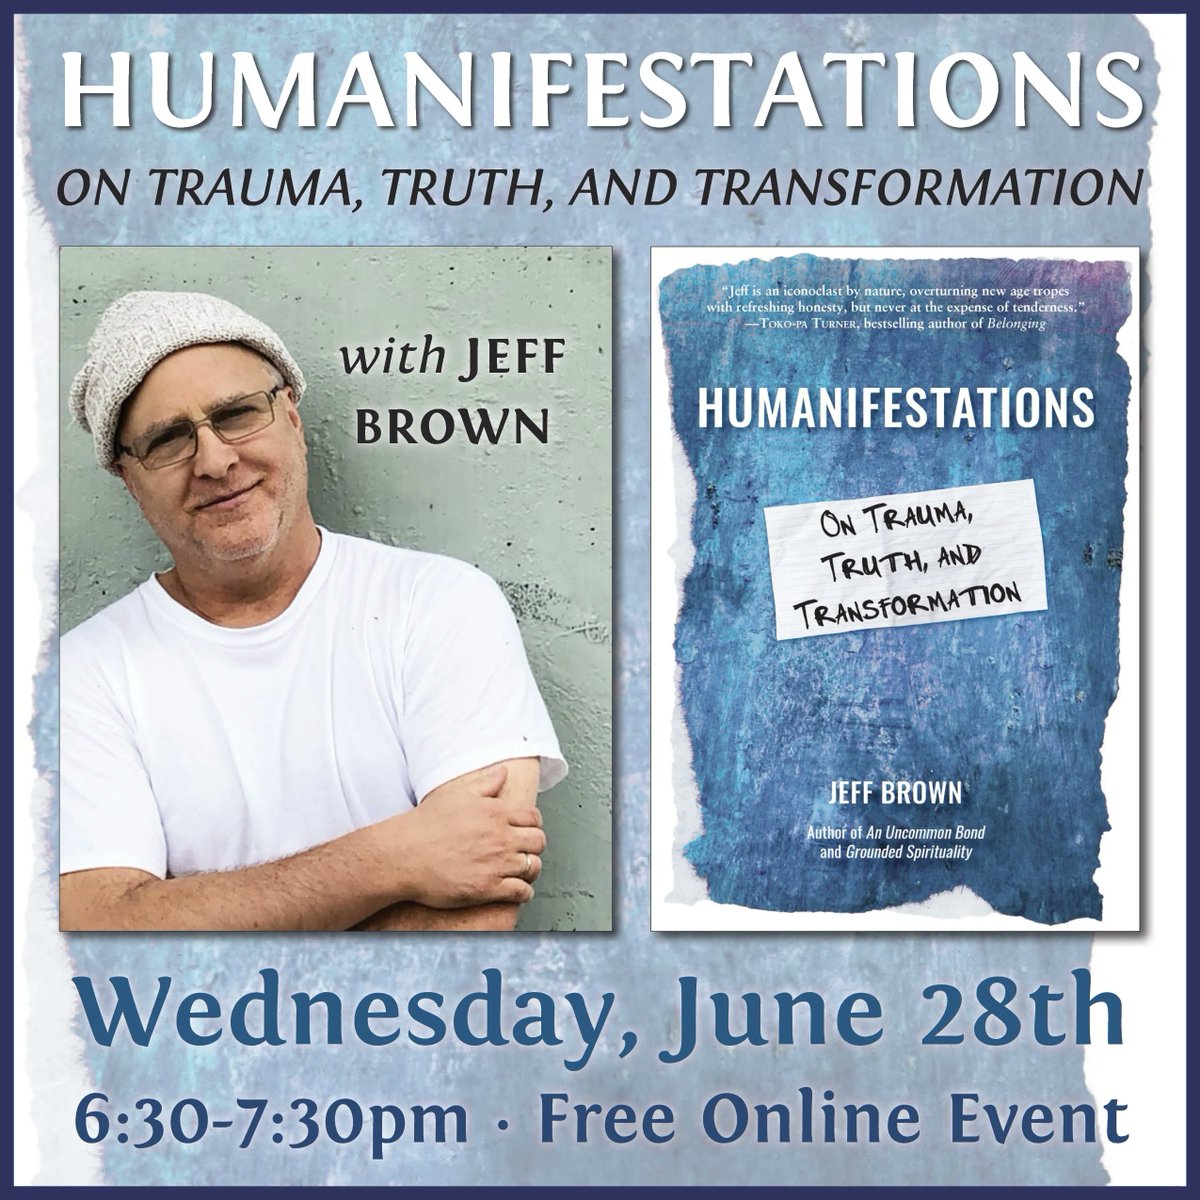 June 28th - Jeff Brown, author of Soulshaping, discusses his new book Humanifestations: On Trauma, Truth, and Transformation. banyen.com/events/26336

#OnlineEvent #VirtualEvent #JeffBrown #Humanifestations #AuthorTalk #Trauma #Soulshaping #PsychologyBooks